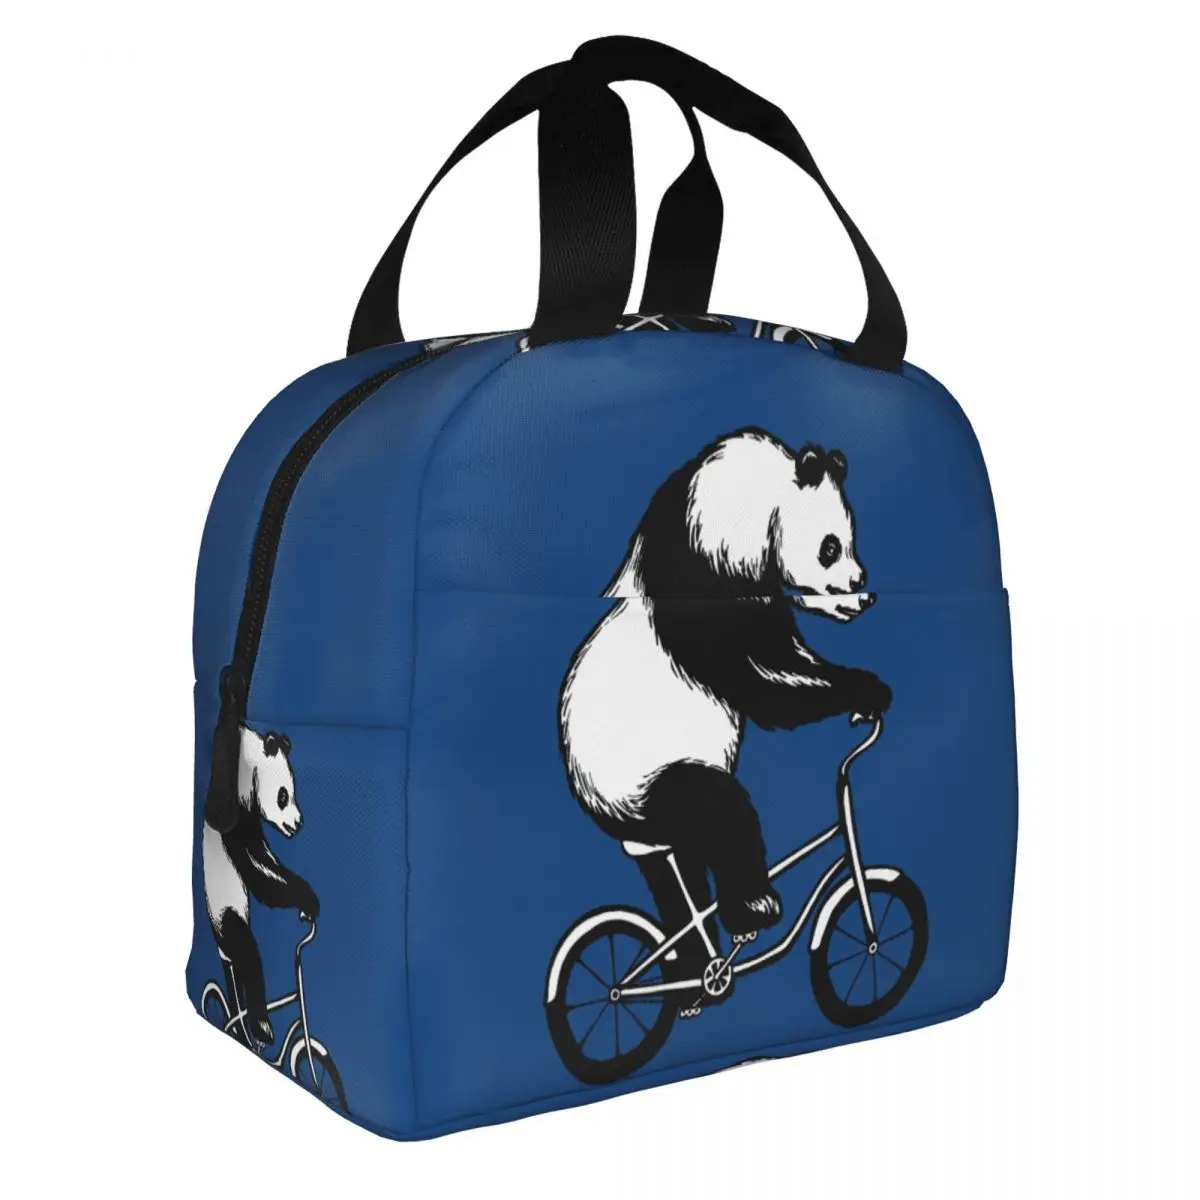 Panda On Bike Lunch Bento Bags Portable Aluminum Foil thickened Thermal Cloth Lunch Bag for Women Men Boy